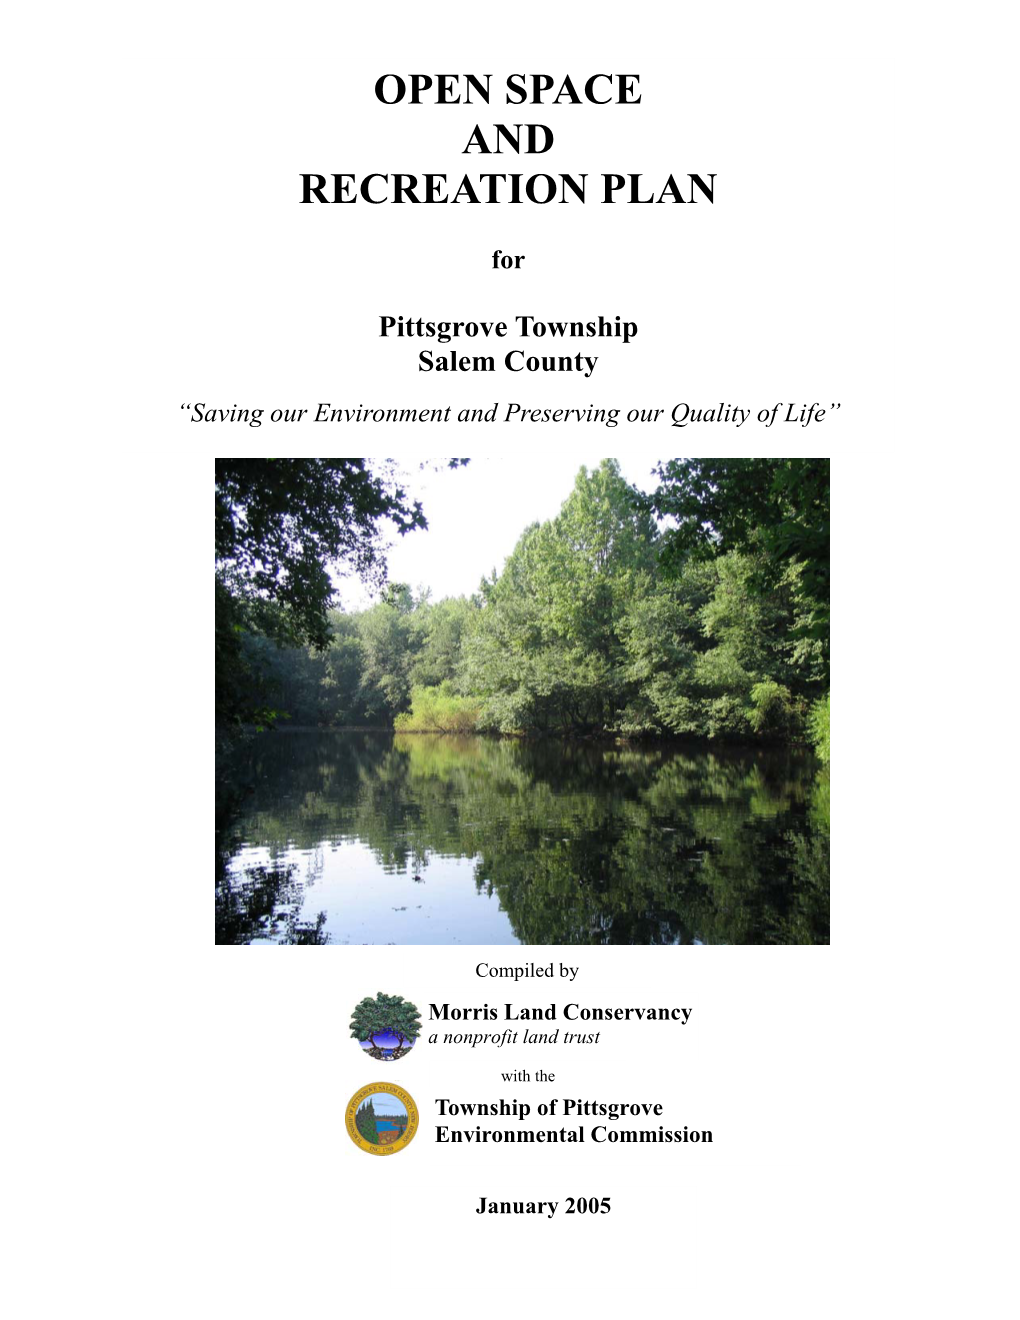 OPEN SPACE and RECREATION PLAN For